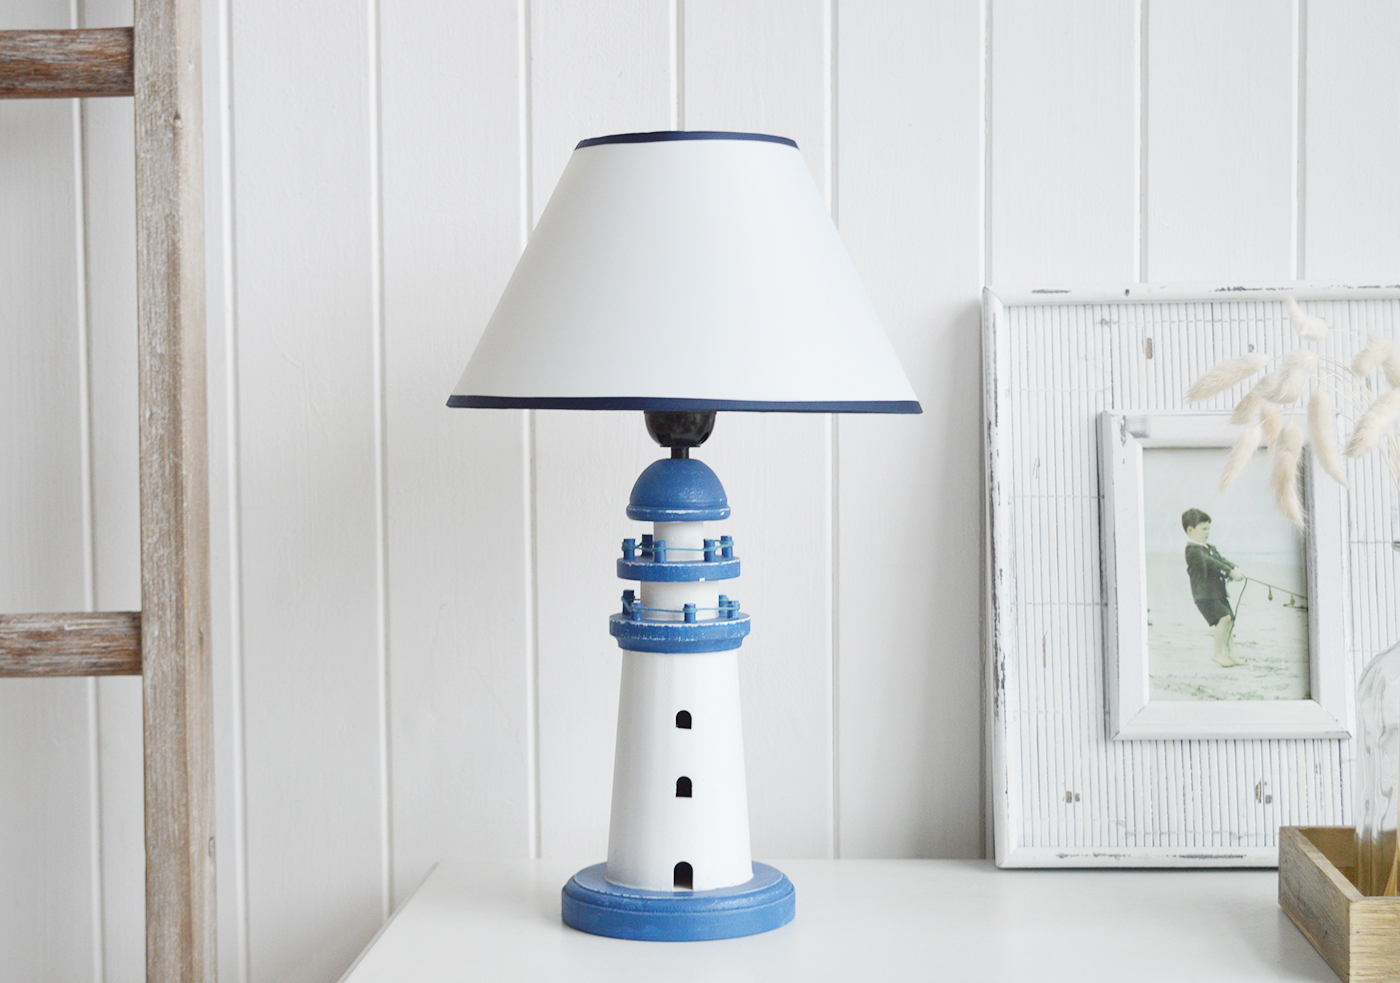 Lighthouse Blue and White table lamp from The White Lighthouse Furniture. A lovely table lamp for bedside table or living room. New England furniture and interiors for coastal, country and city homes. 